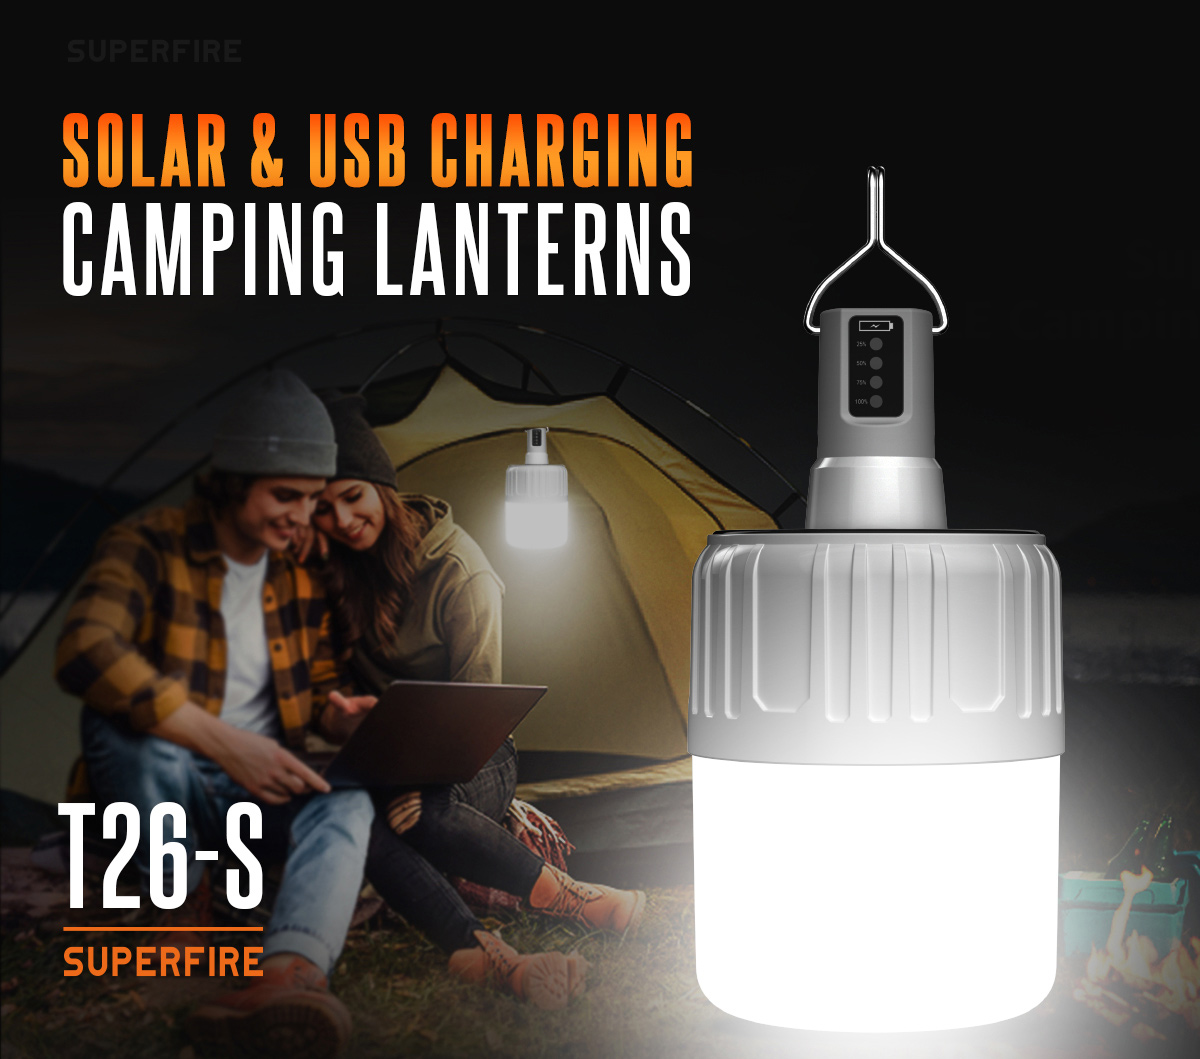 SUPERFIRE: The Ultimate Light For Outdoor Adventures